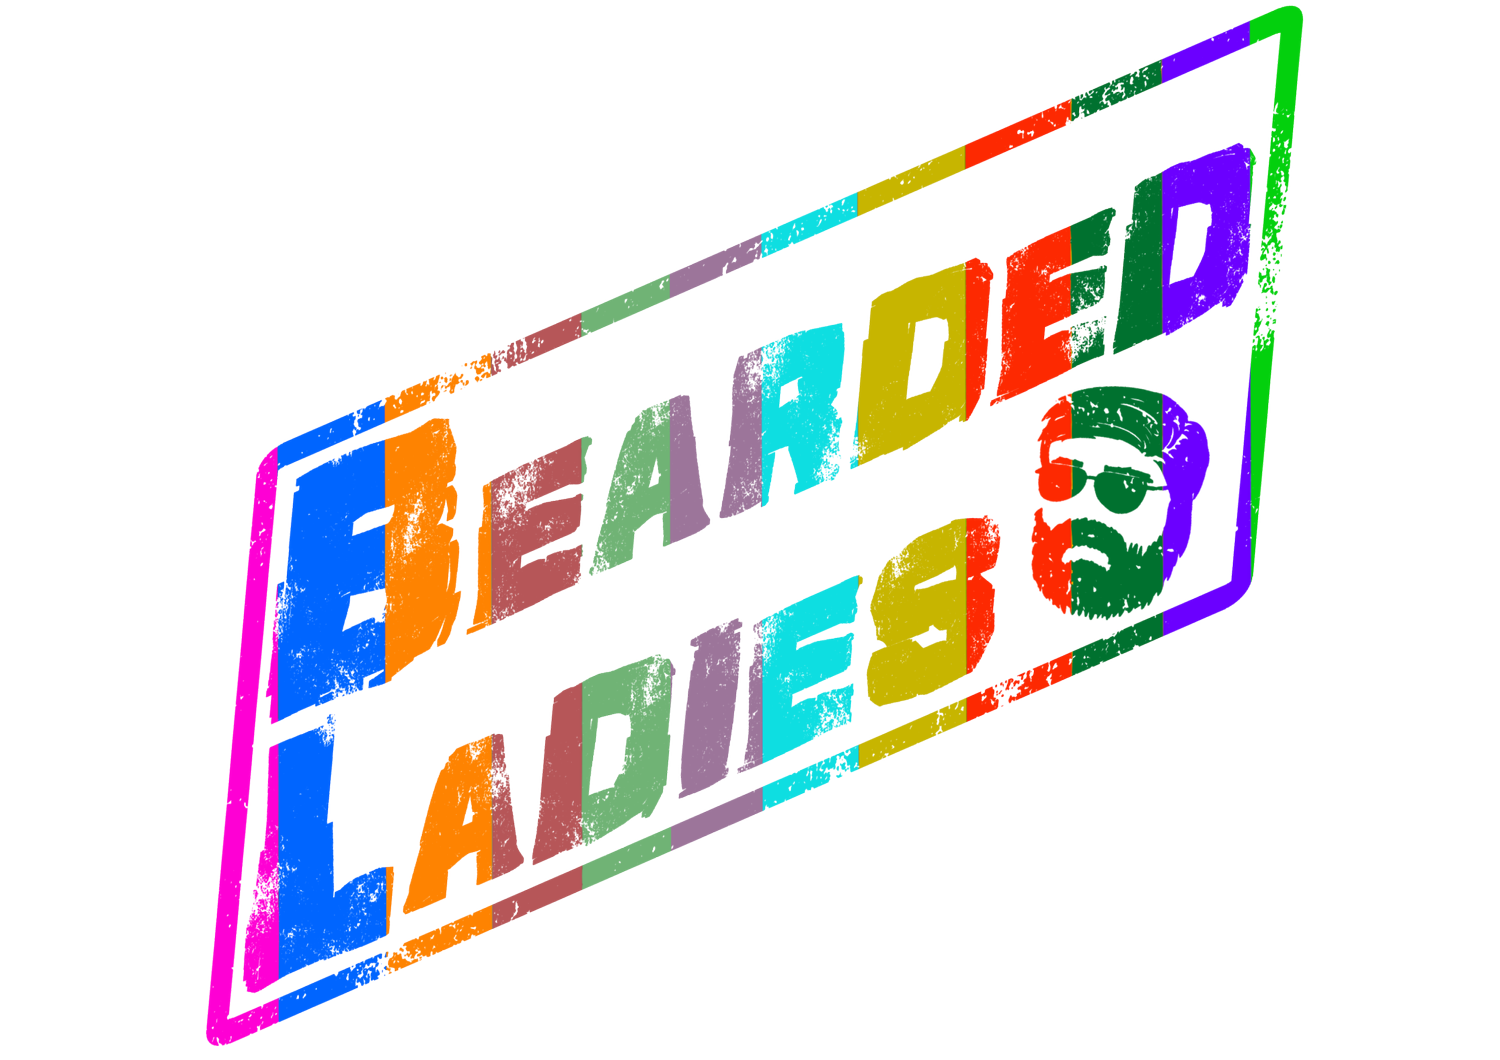 Bearded Ladies Manufacturing Company